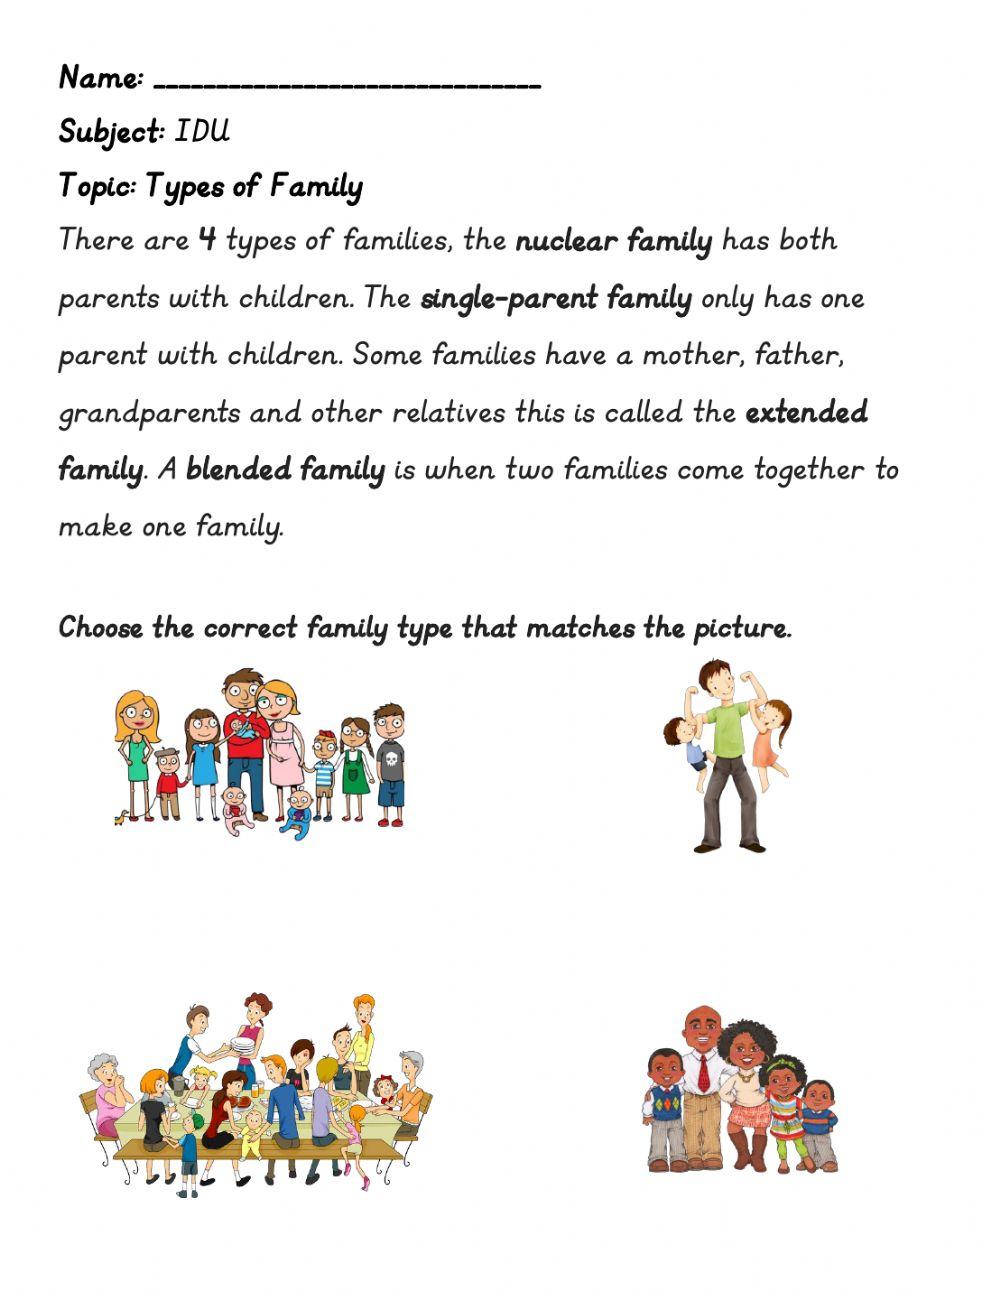 The 4 Types of Families